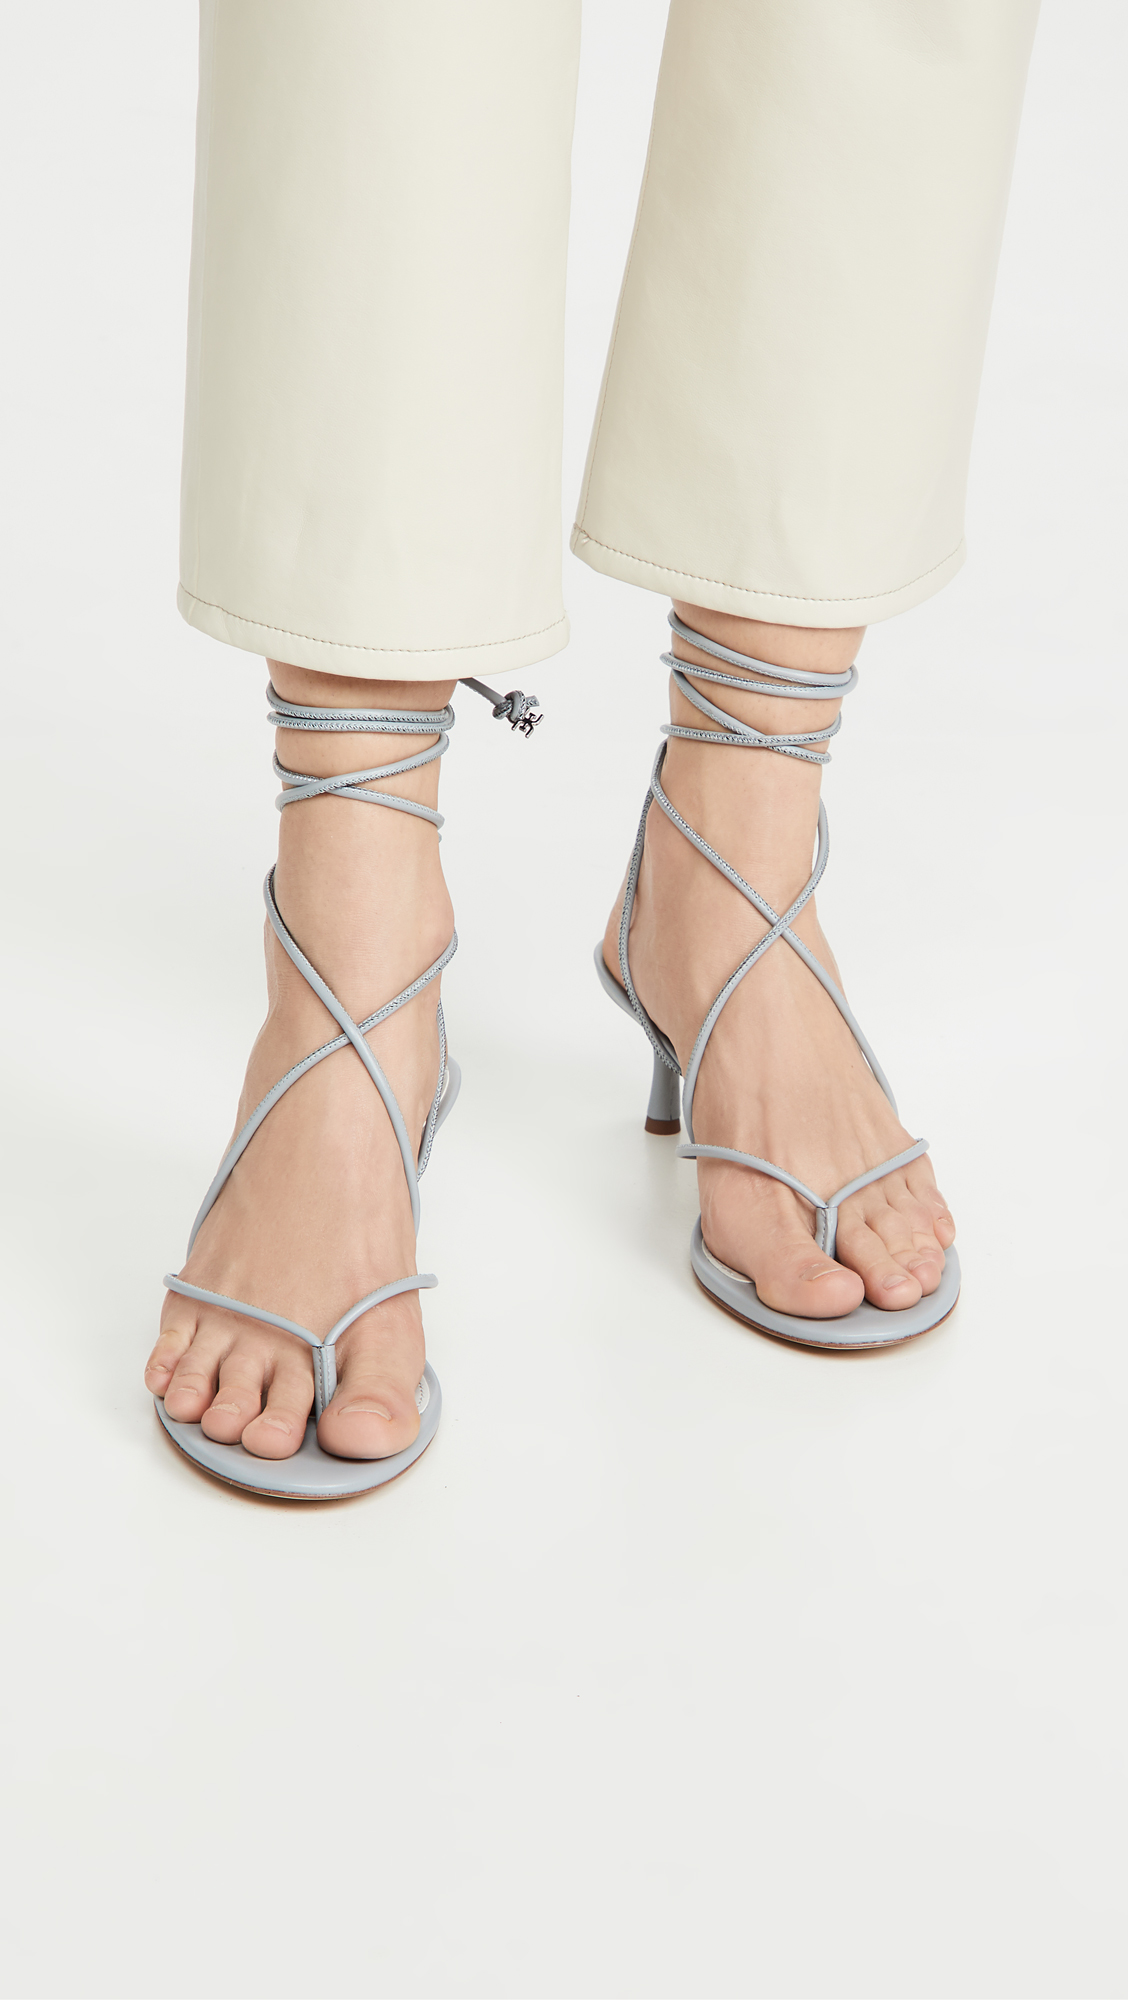 Buy > strappy heels low > in stock